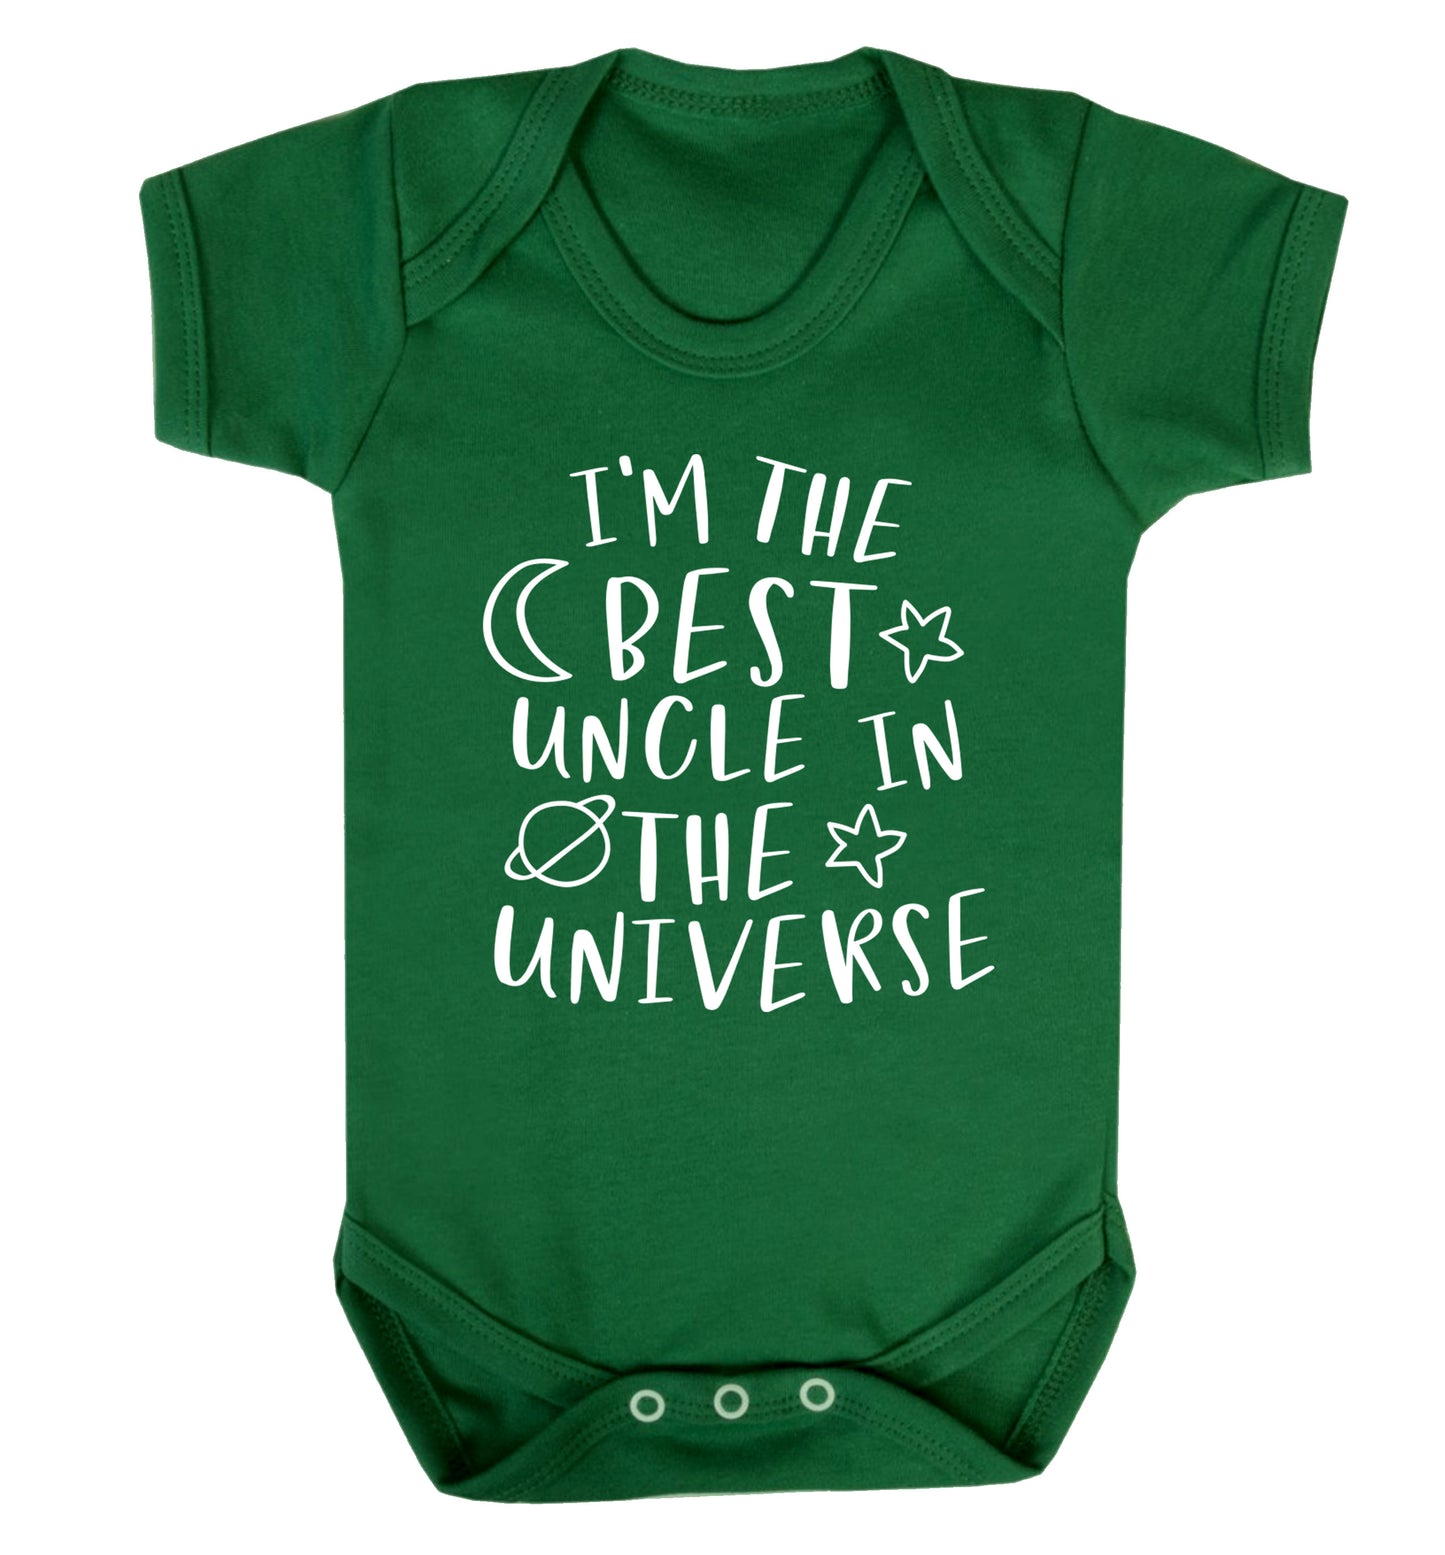 I'm the best uncle in the universe Baby Vest green 18-24 months